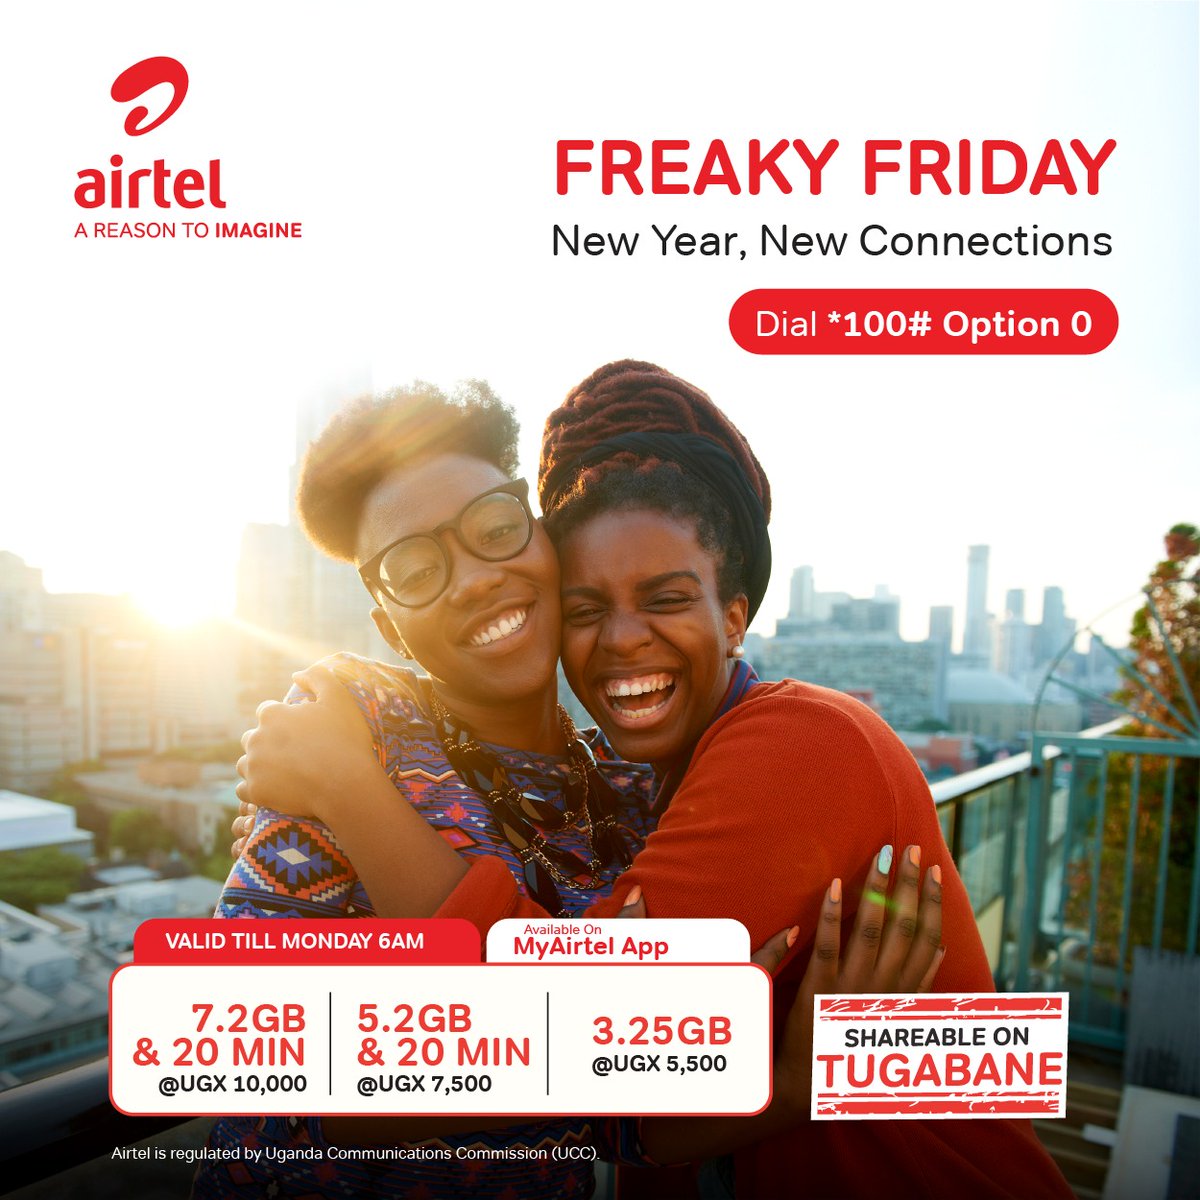 It's the 1st Friday of the year, make new connections with #FreakyFriday. 

Dial *100# and select option 0 for a bundle or use the #MyAirtelApp
airtelafrica.onelink.me/cGyr/qgj4qeu2

#AReasonToImagine